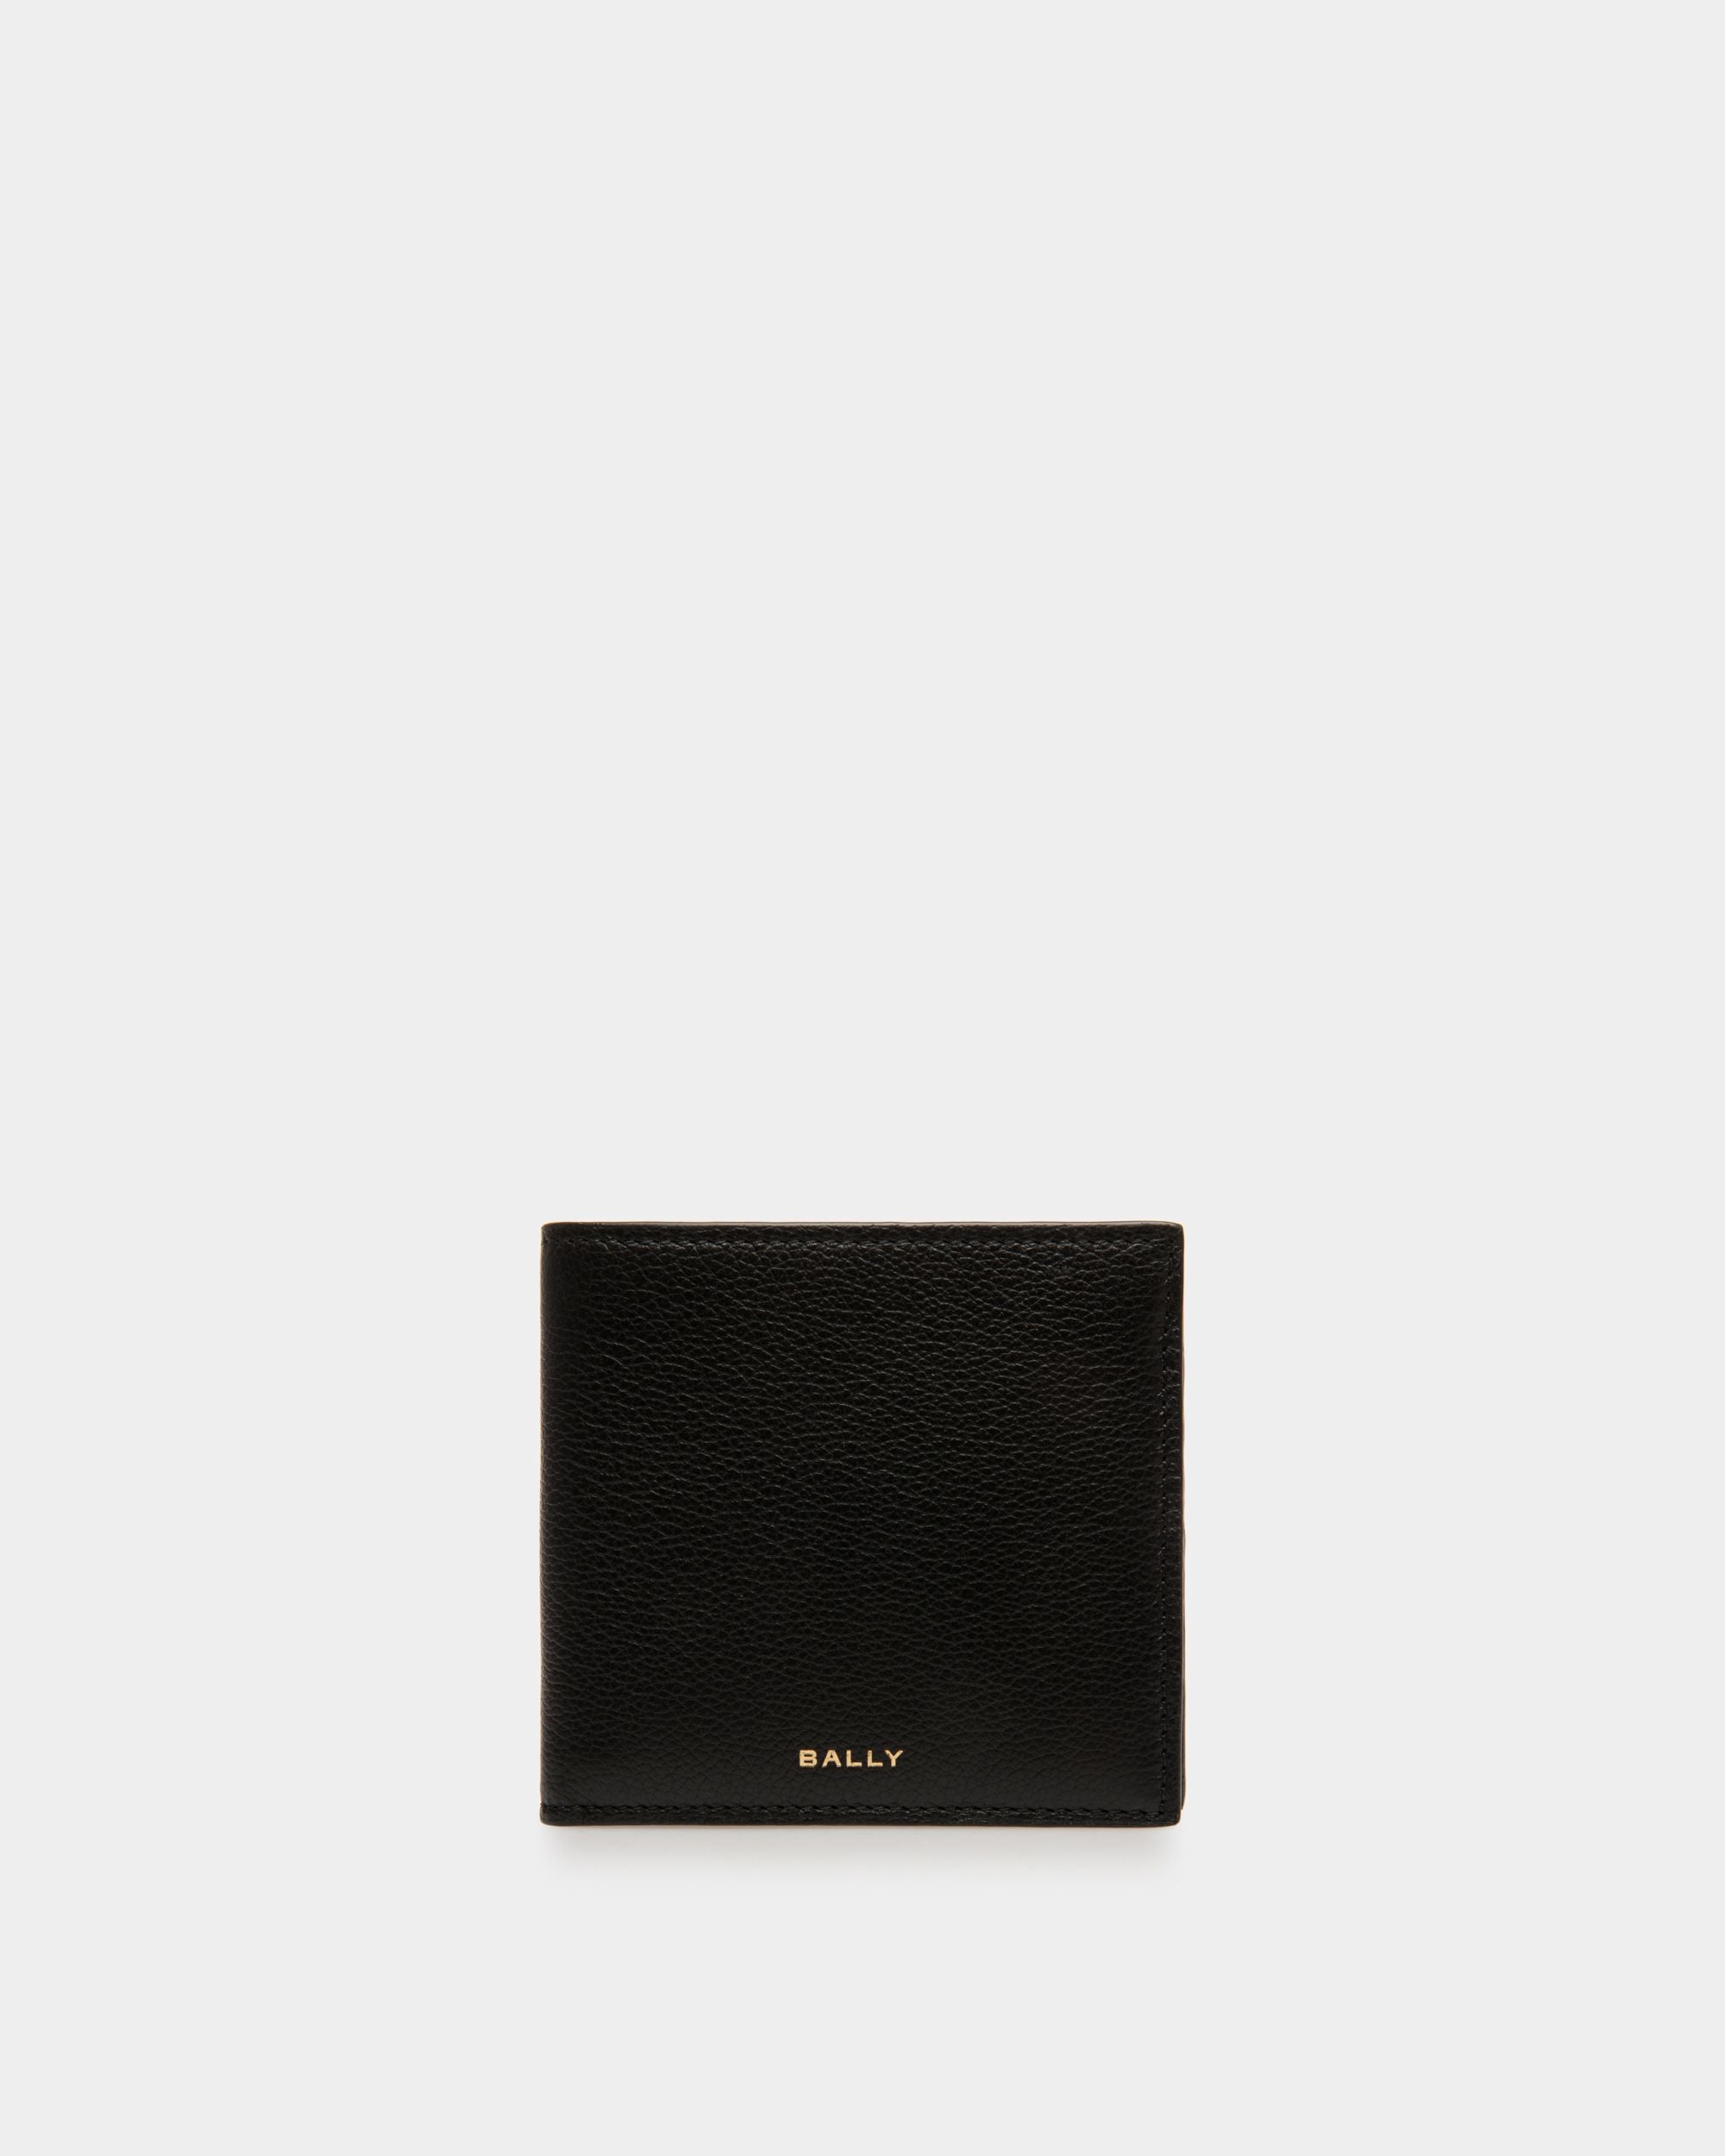 Men's Bifold 8 CC Wallet In Black Leather | Bally | Still Life Front